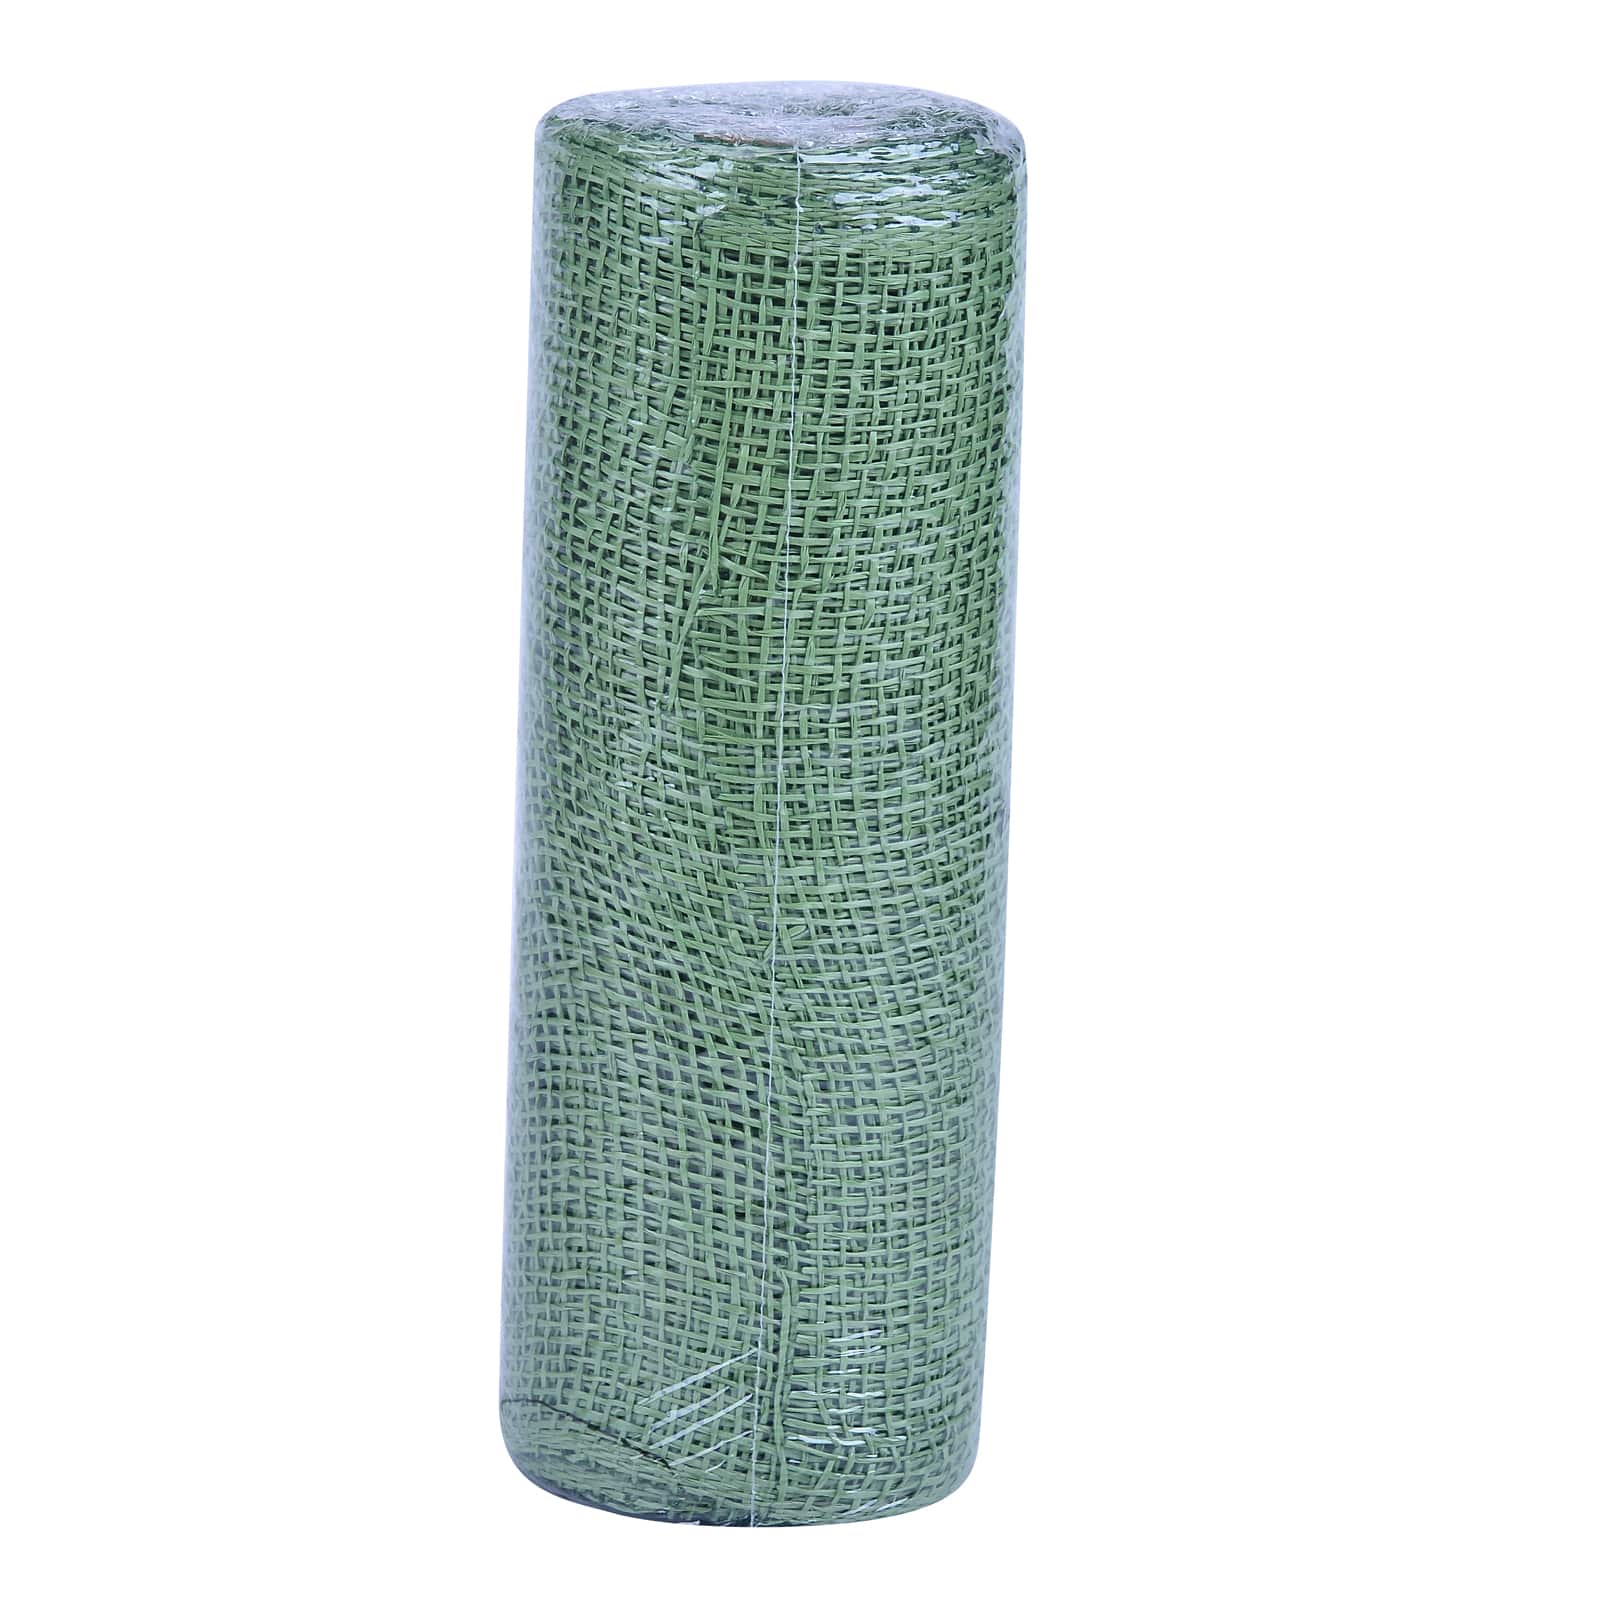 Shop for the 10 Green Poly Burlap Mesh by Celebrate It™ at Michaels